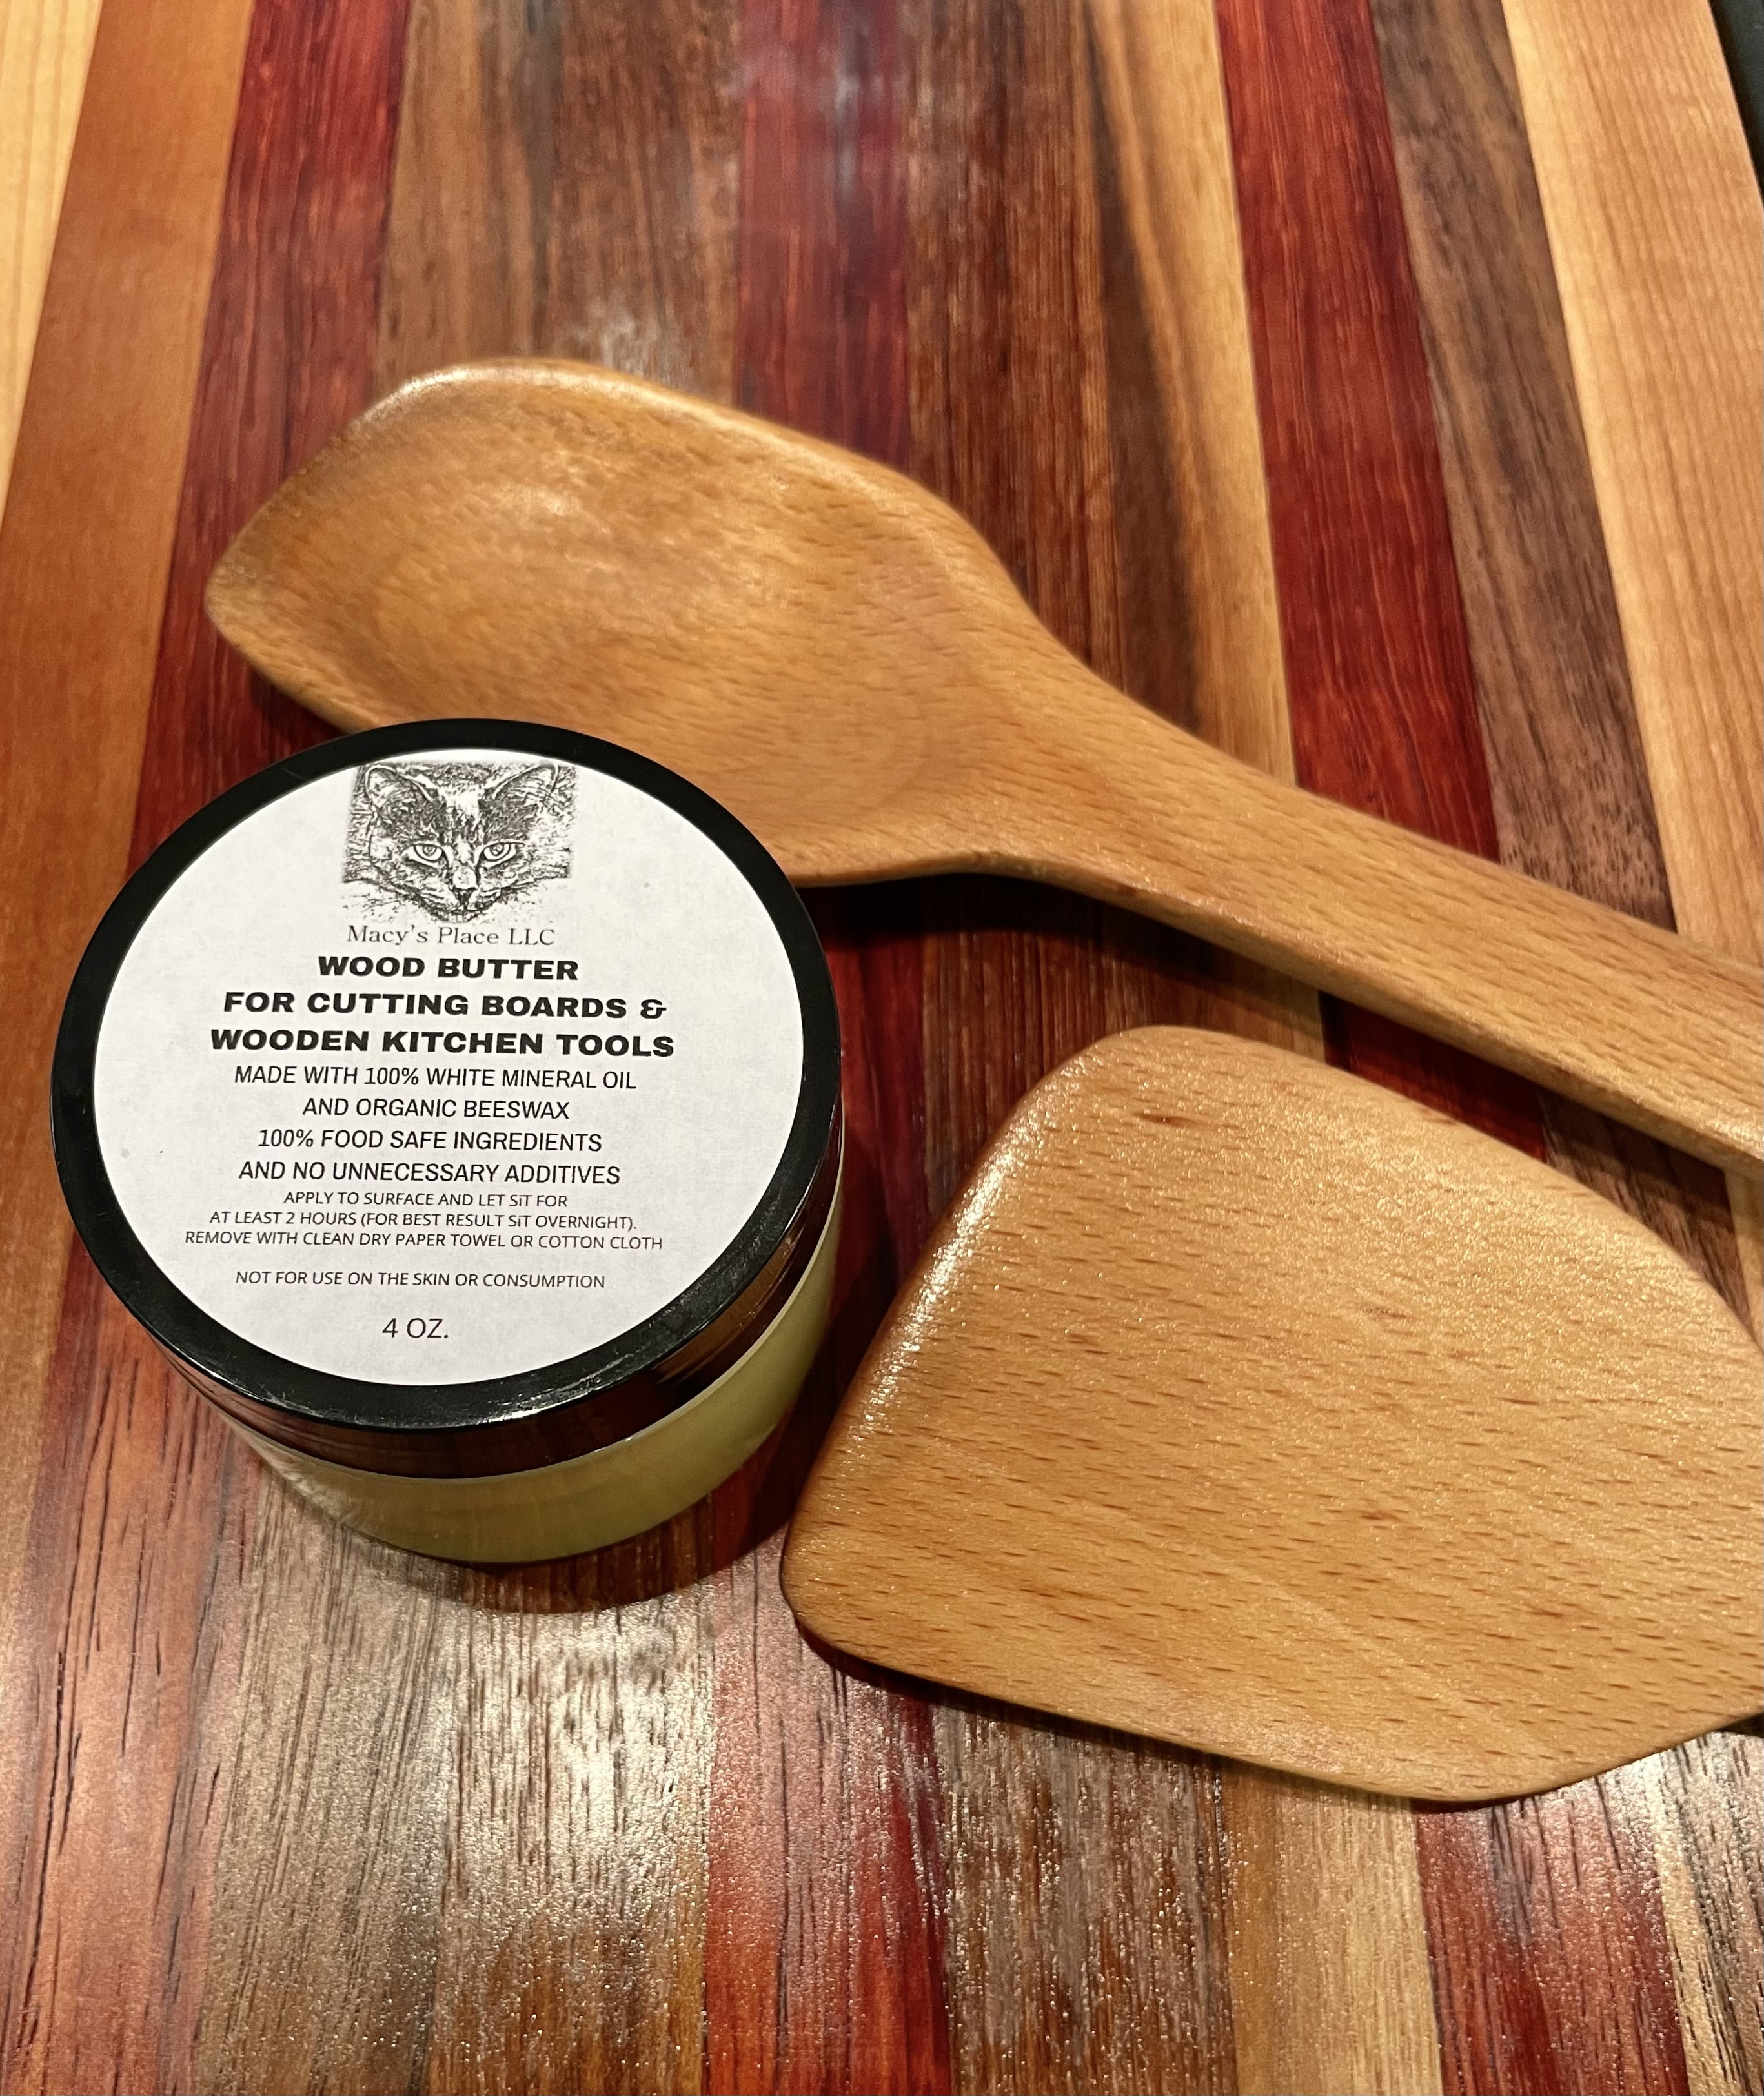 Wood Butter Cutting Board Wax - 8 oz - Conditioner for Butcher Block and Wooden Kitchen Tools. Macy;s Place Food Grade Mineral Oil and Beeswax for